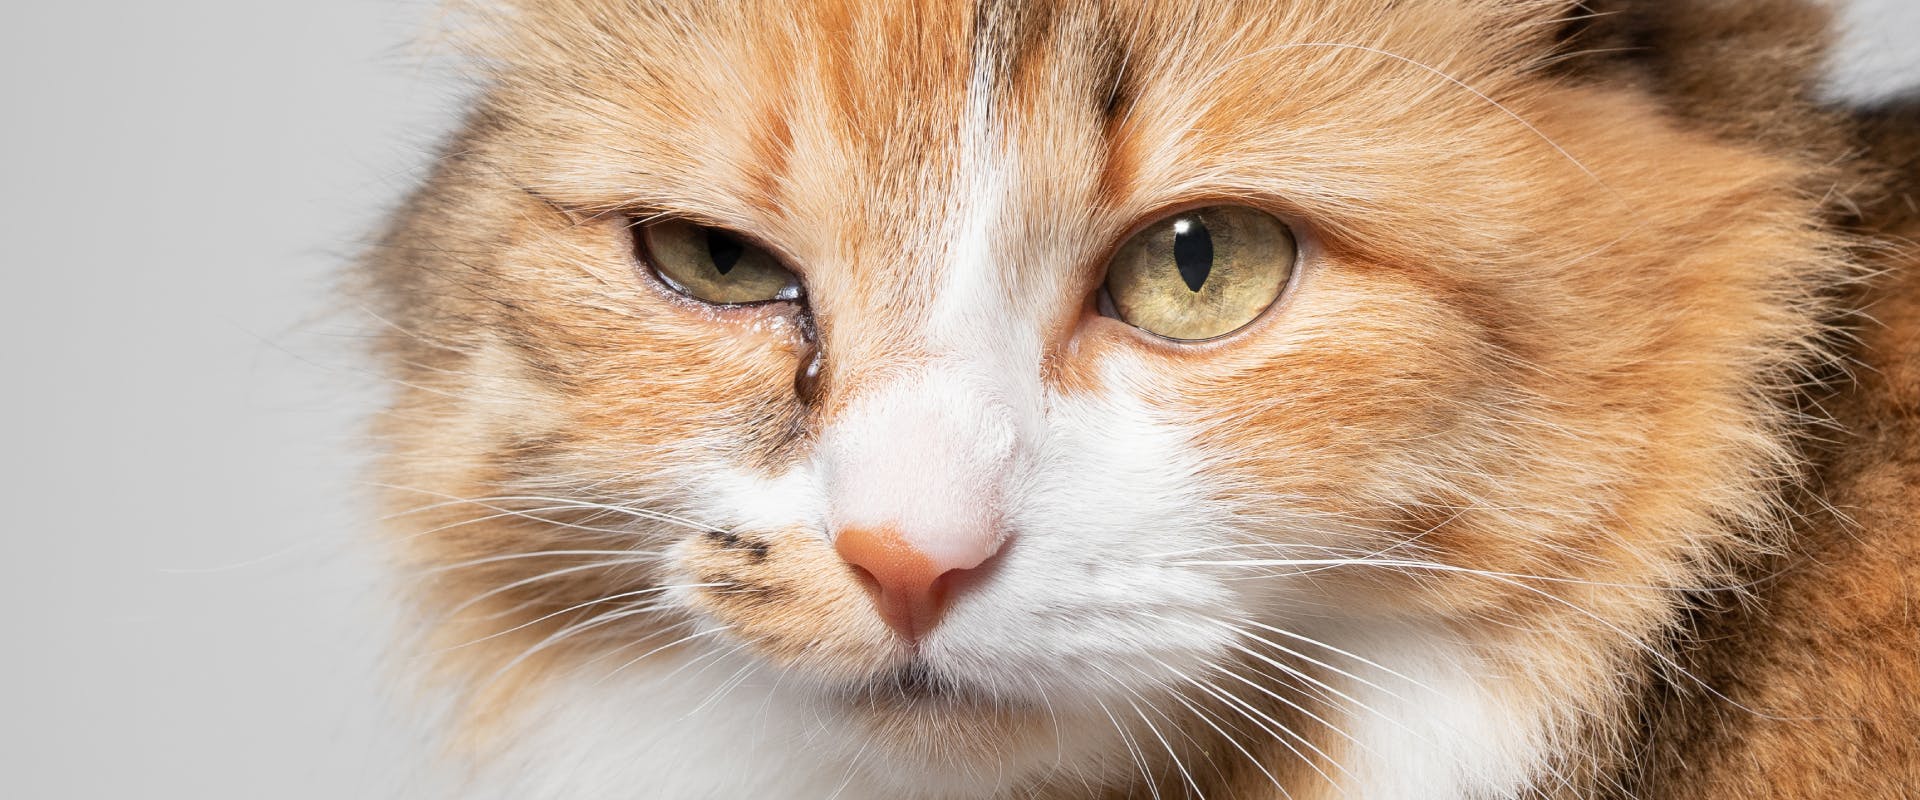 a long haired ginger and white cat with brown cat eye discharge next to its right eye